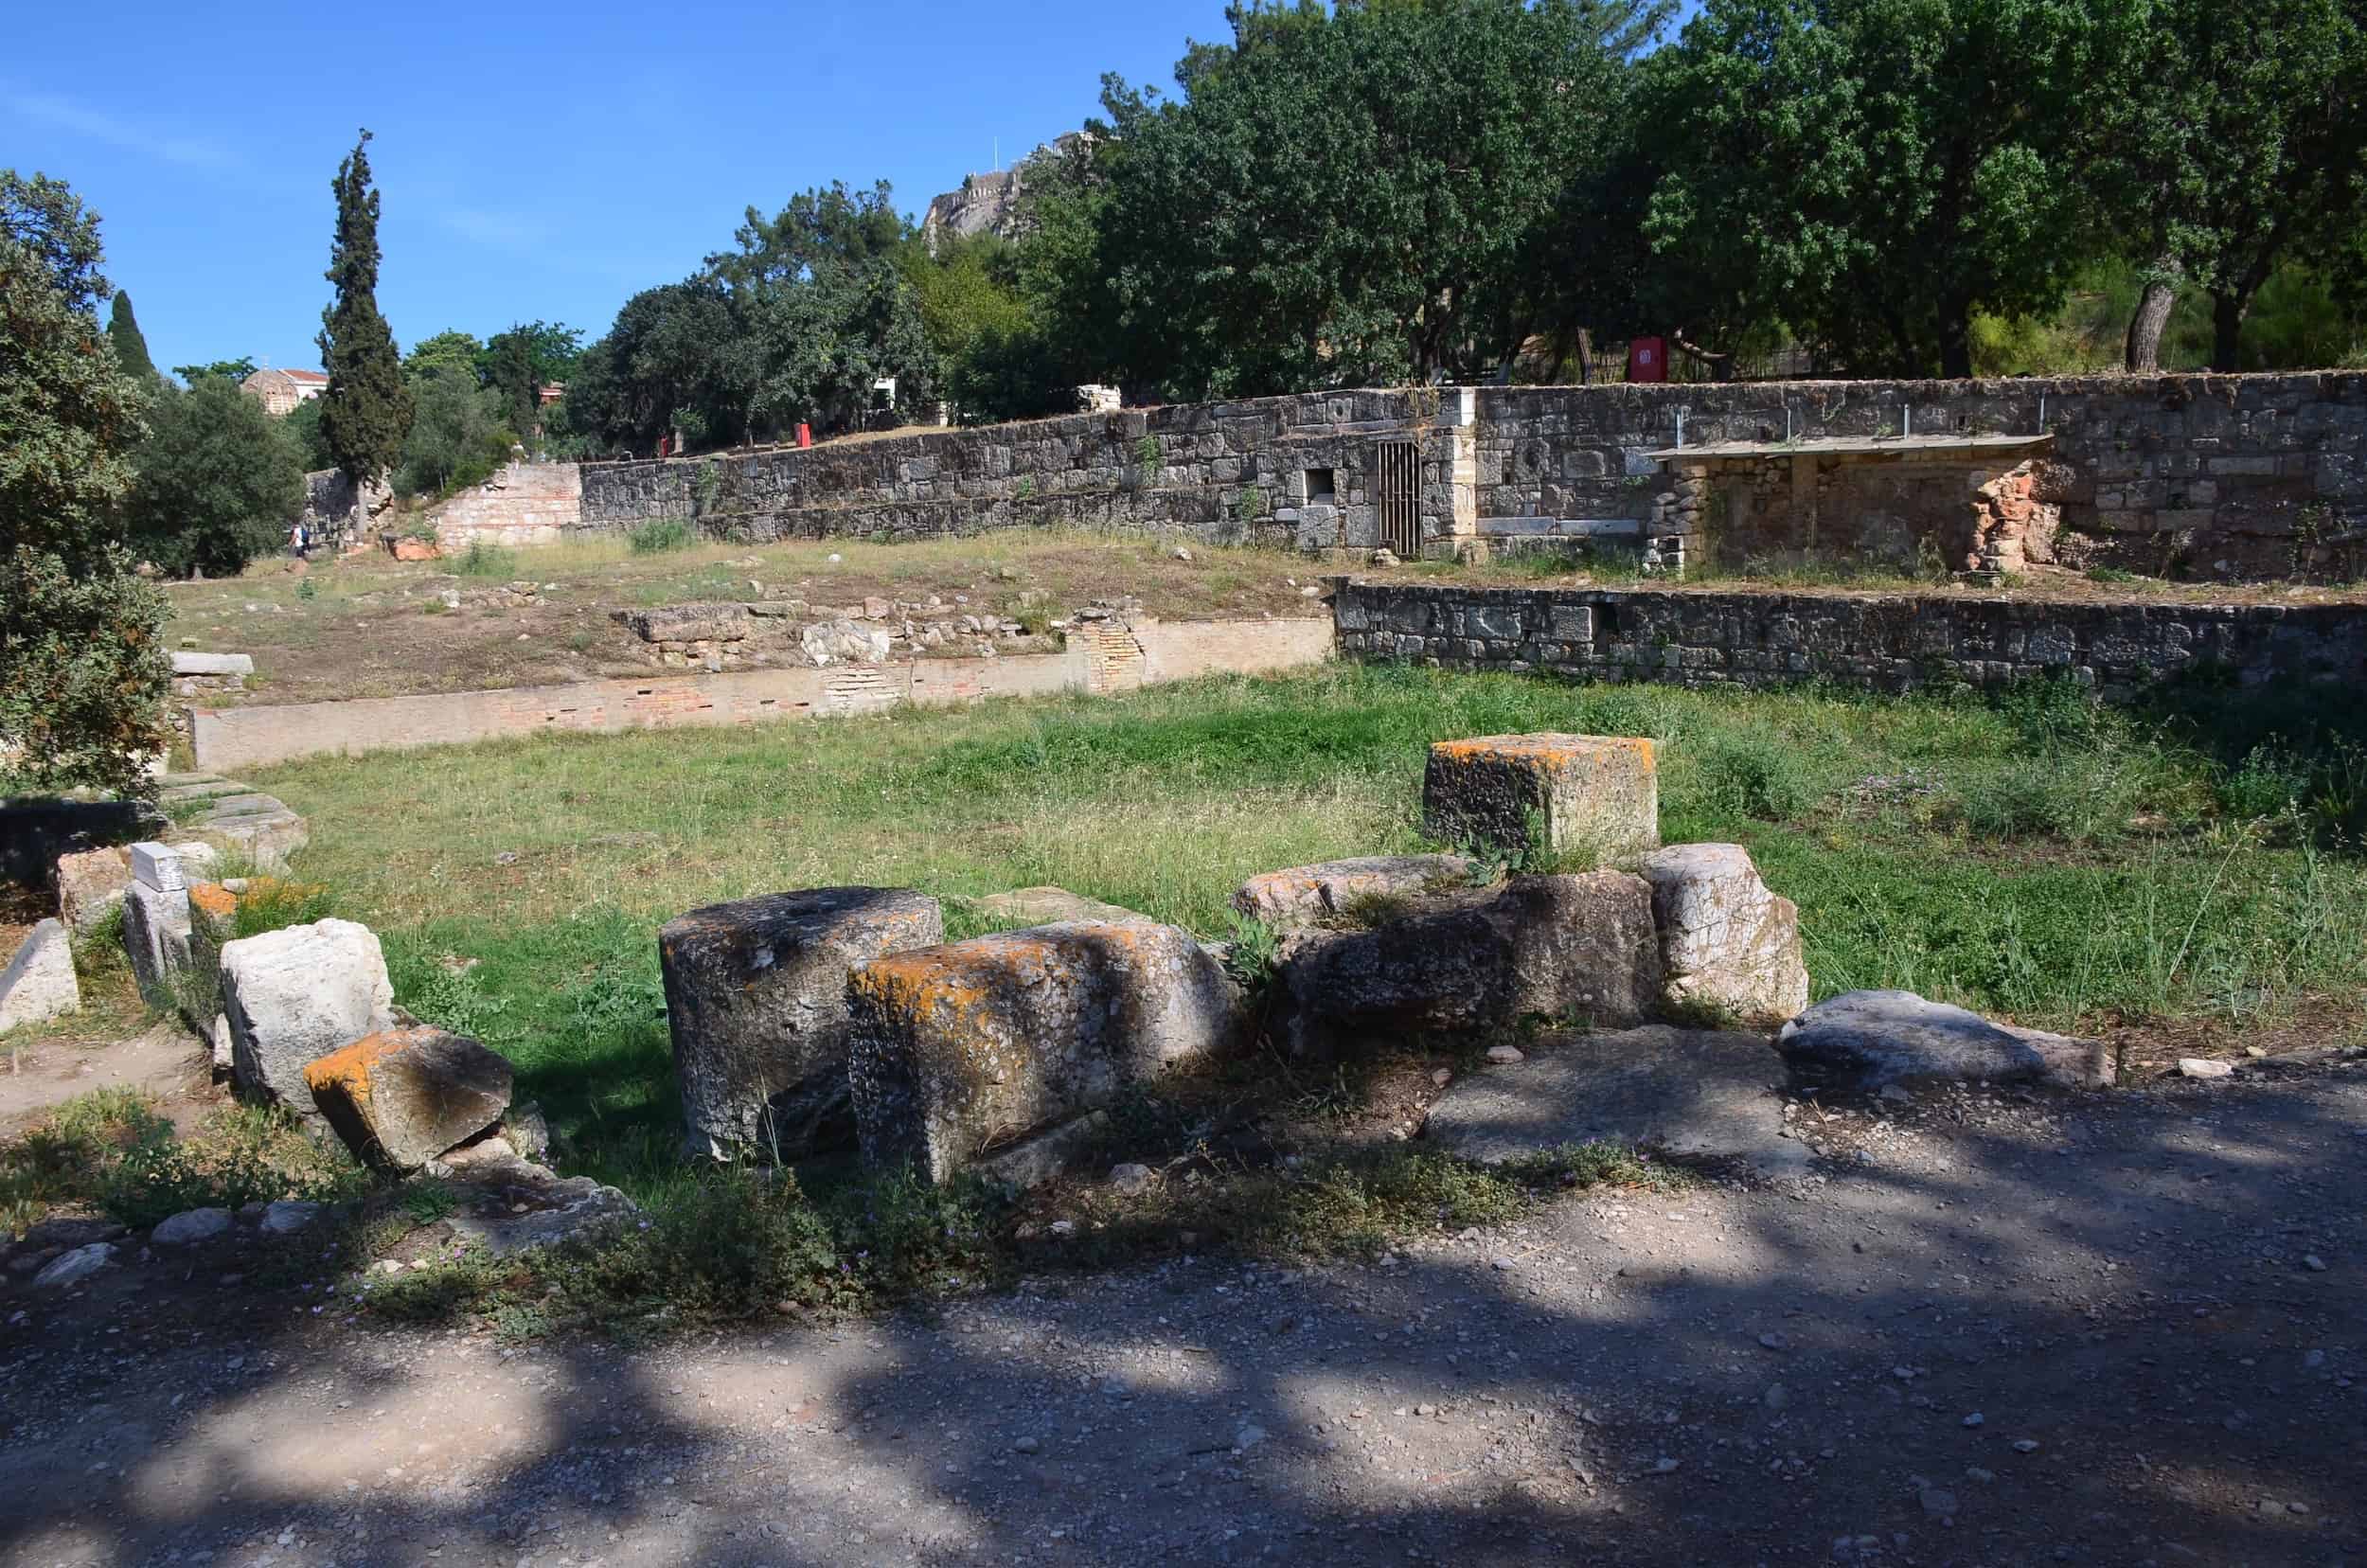 Southwest Fountain House at the Ancient Agora of Athens